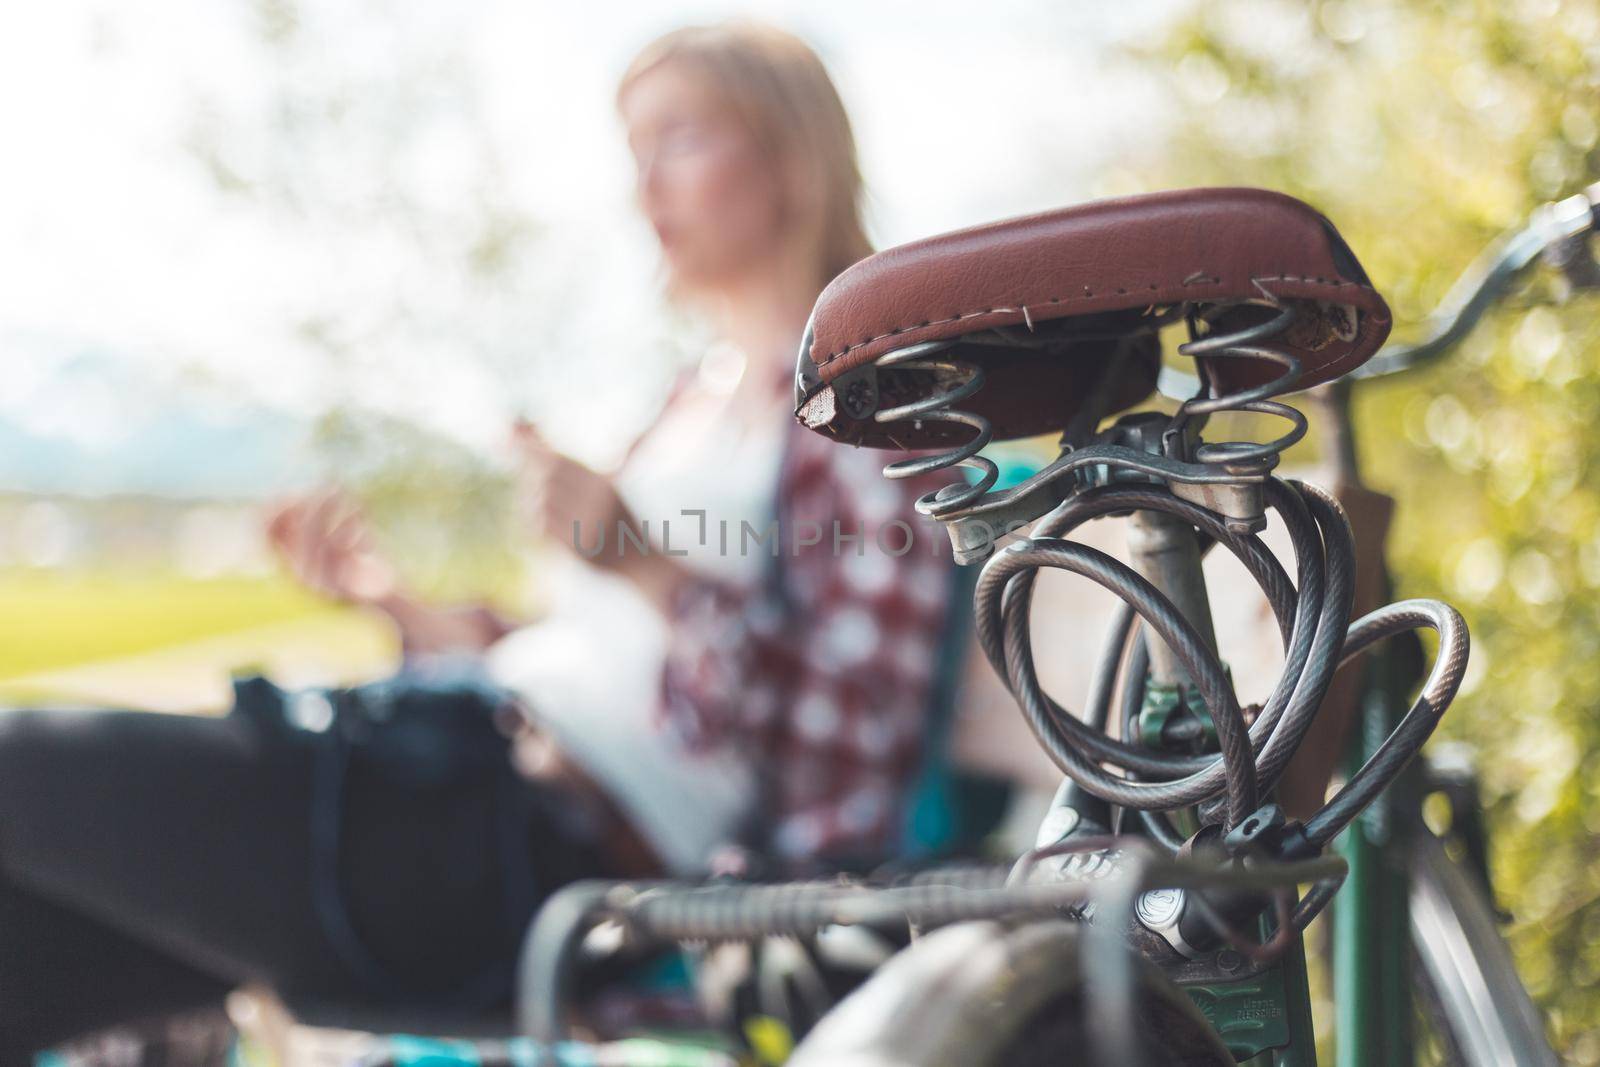 Closeup picture of brown vintage bicycle seat, blonde girl sitting in blurry background